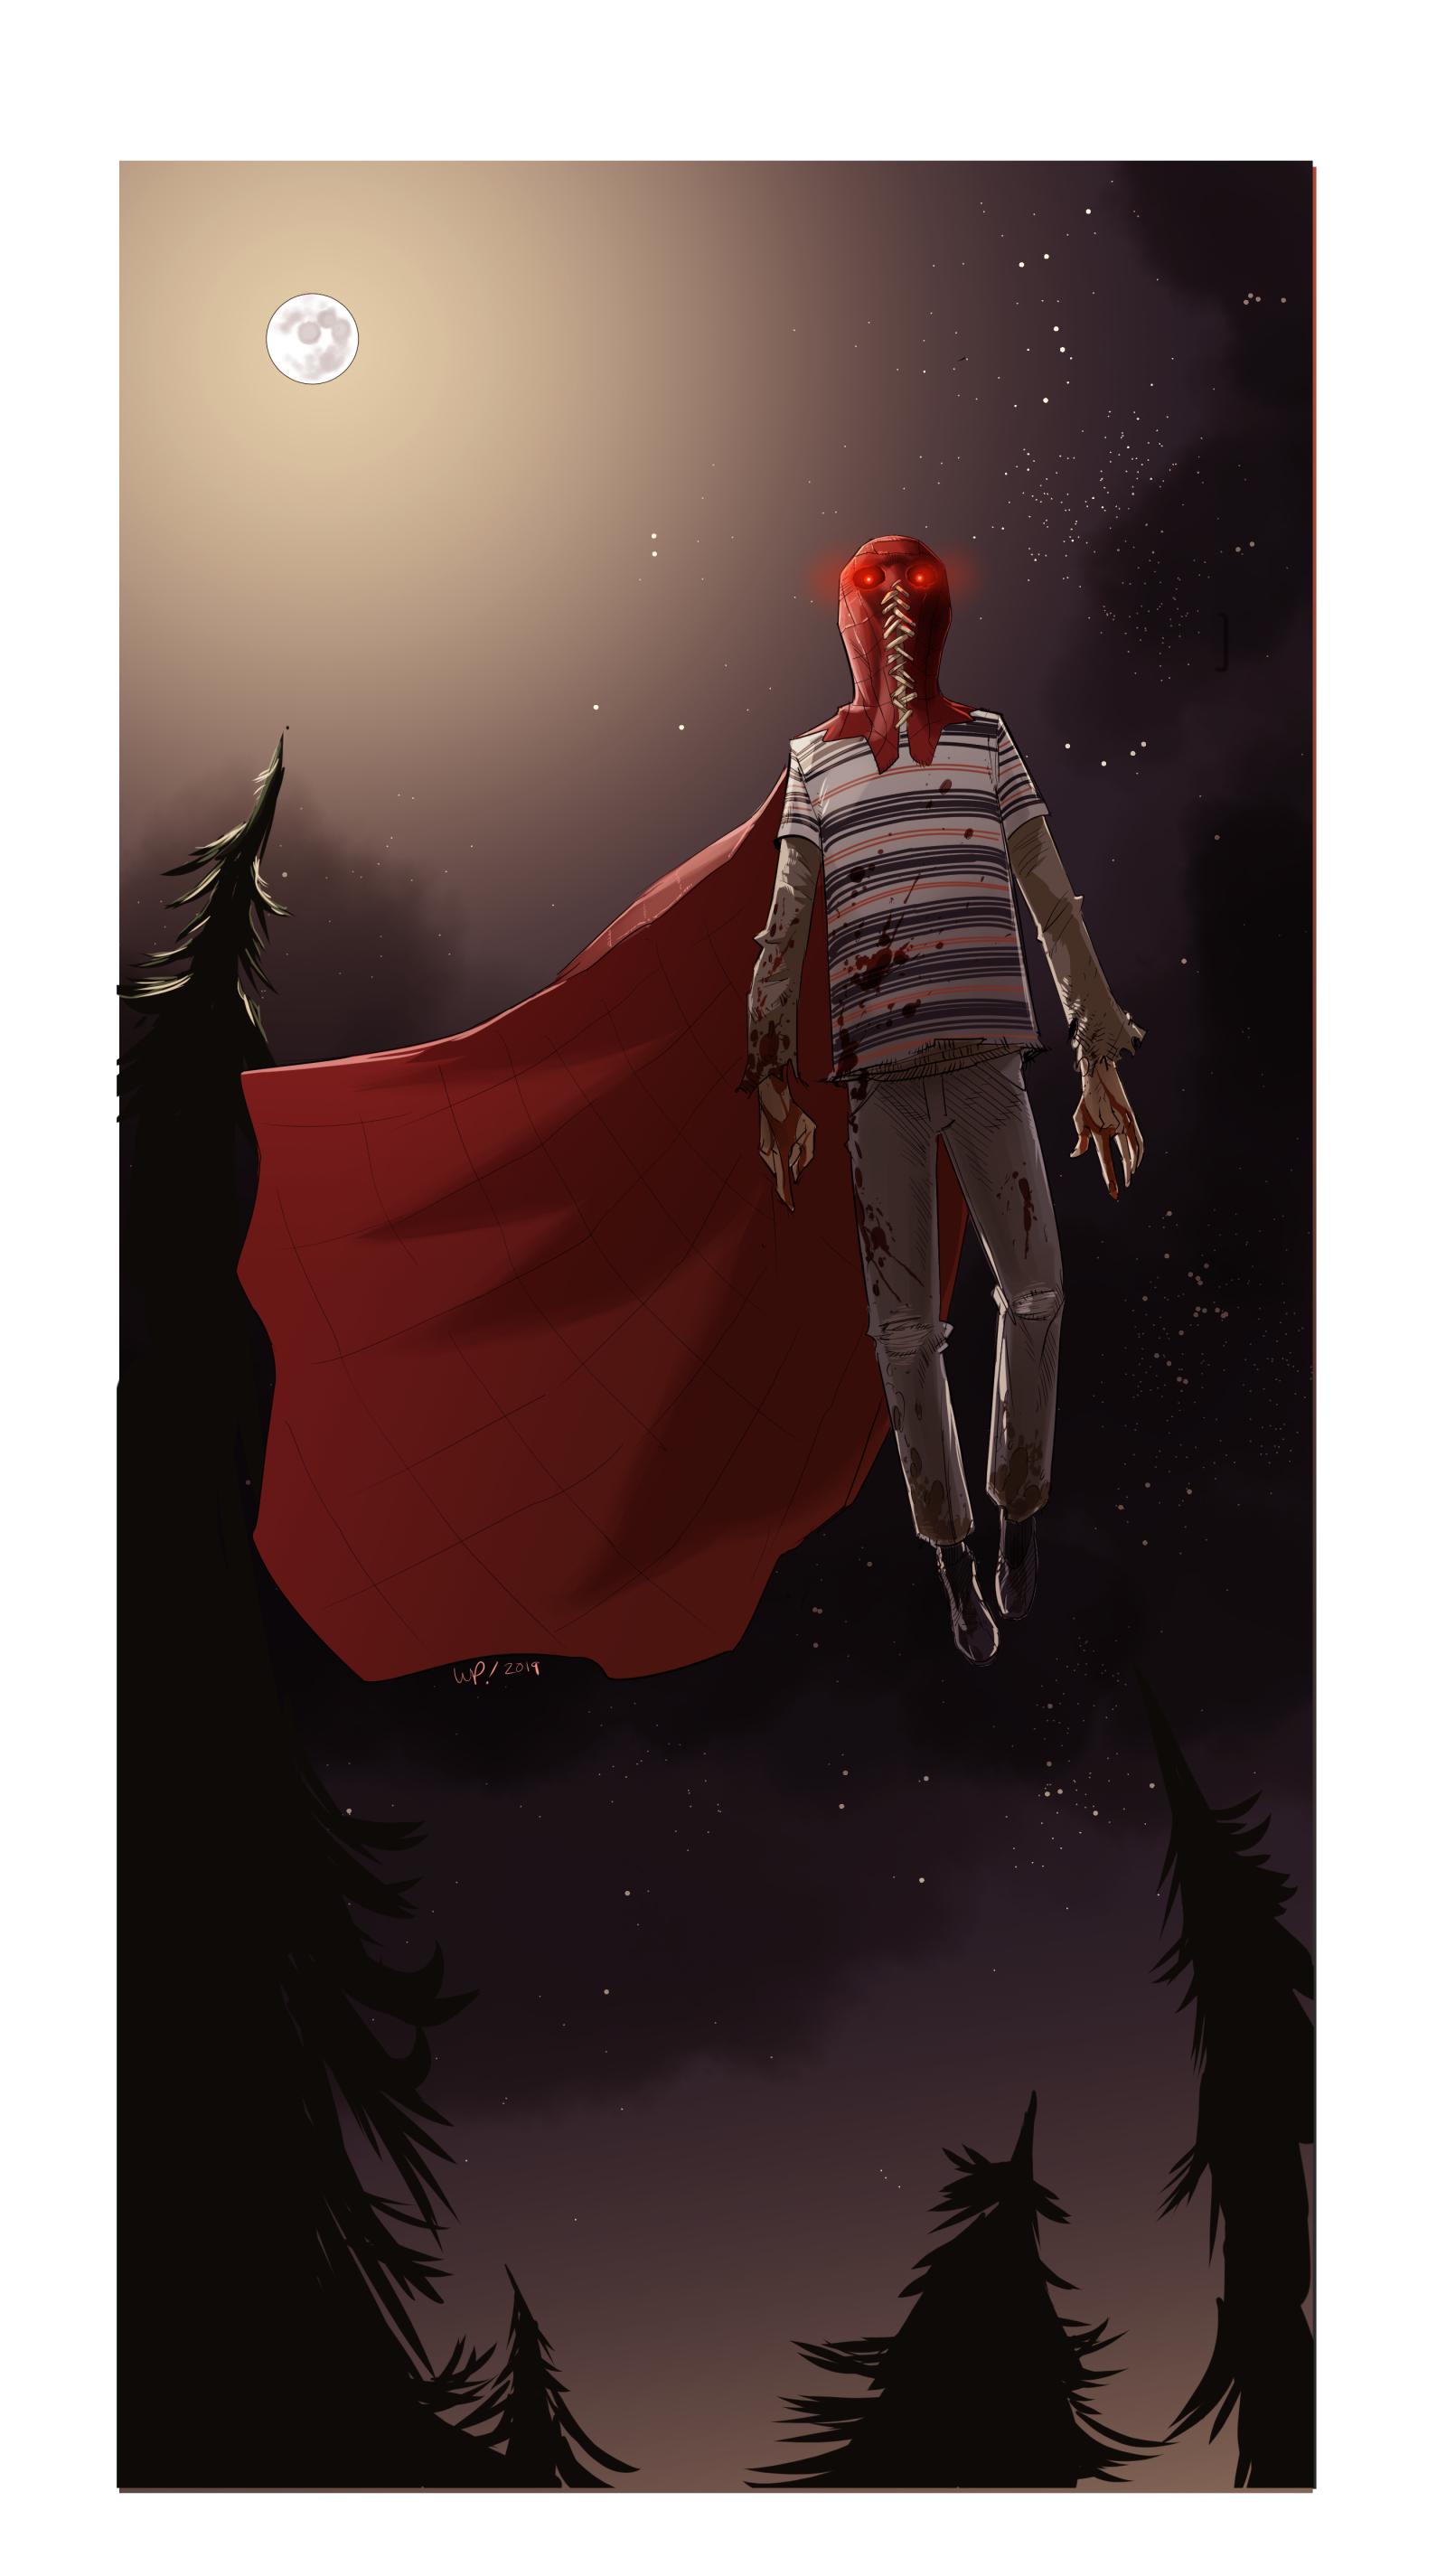 Brightburn fanart, getting excited for this one